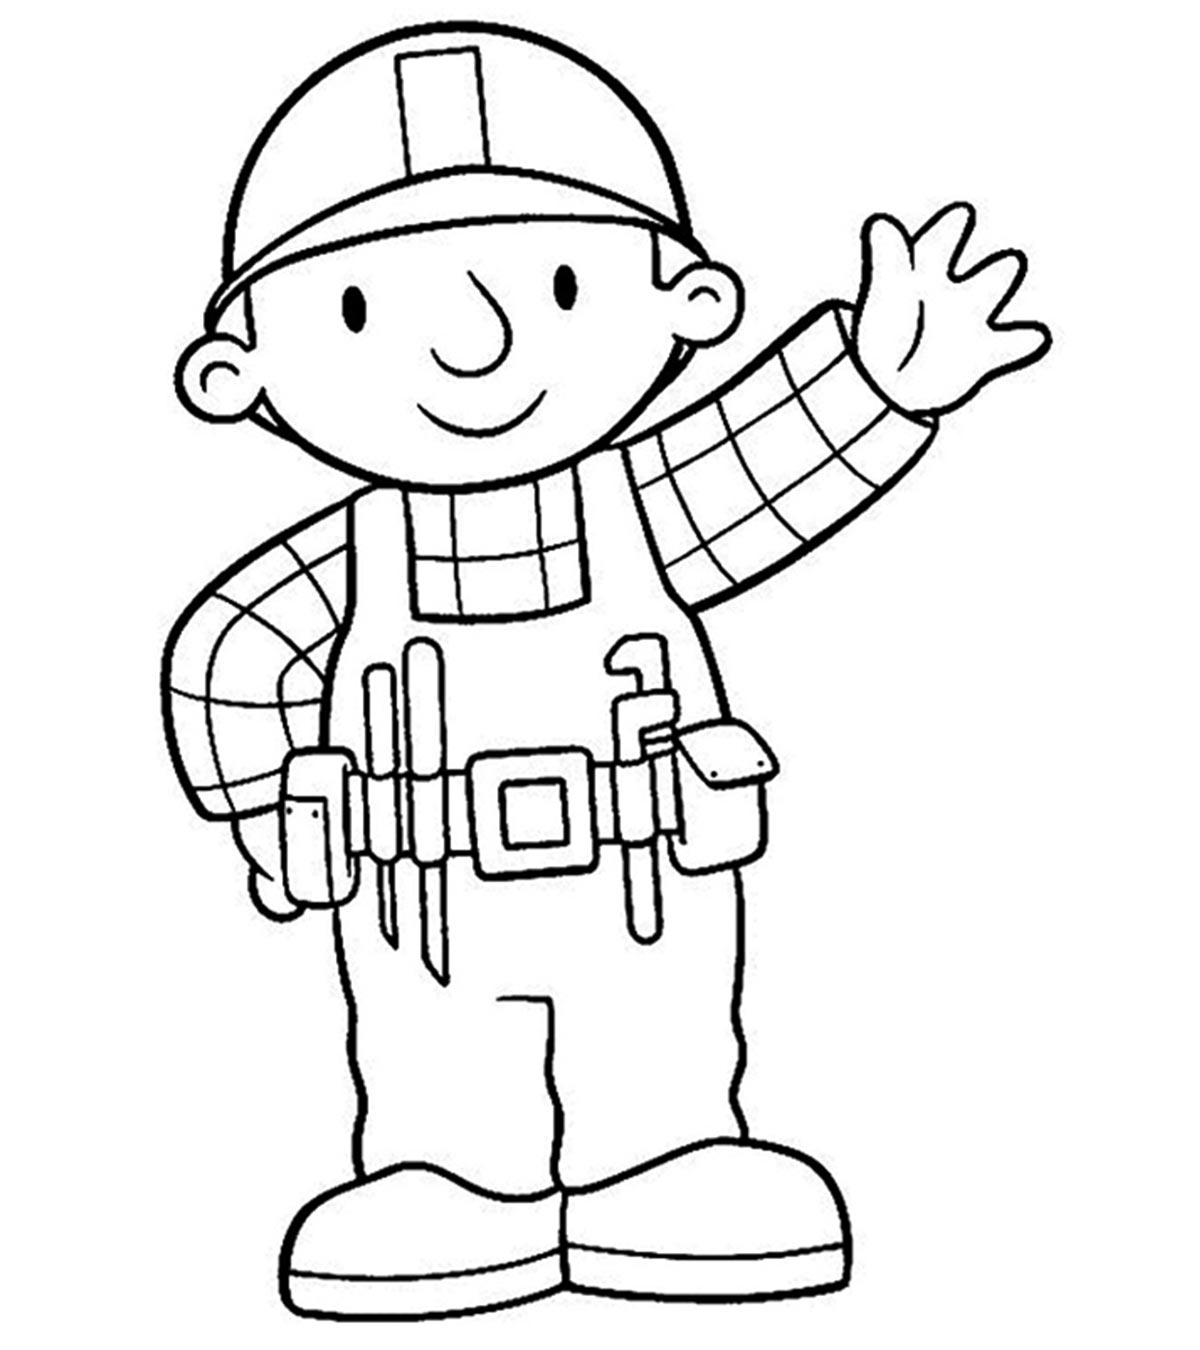 Top 10 Bob The Builder Coloring Pages Your Toddler Will Love